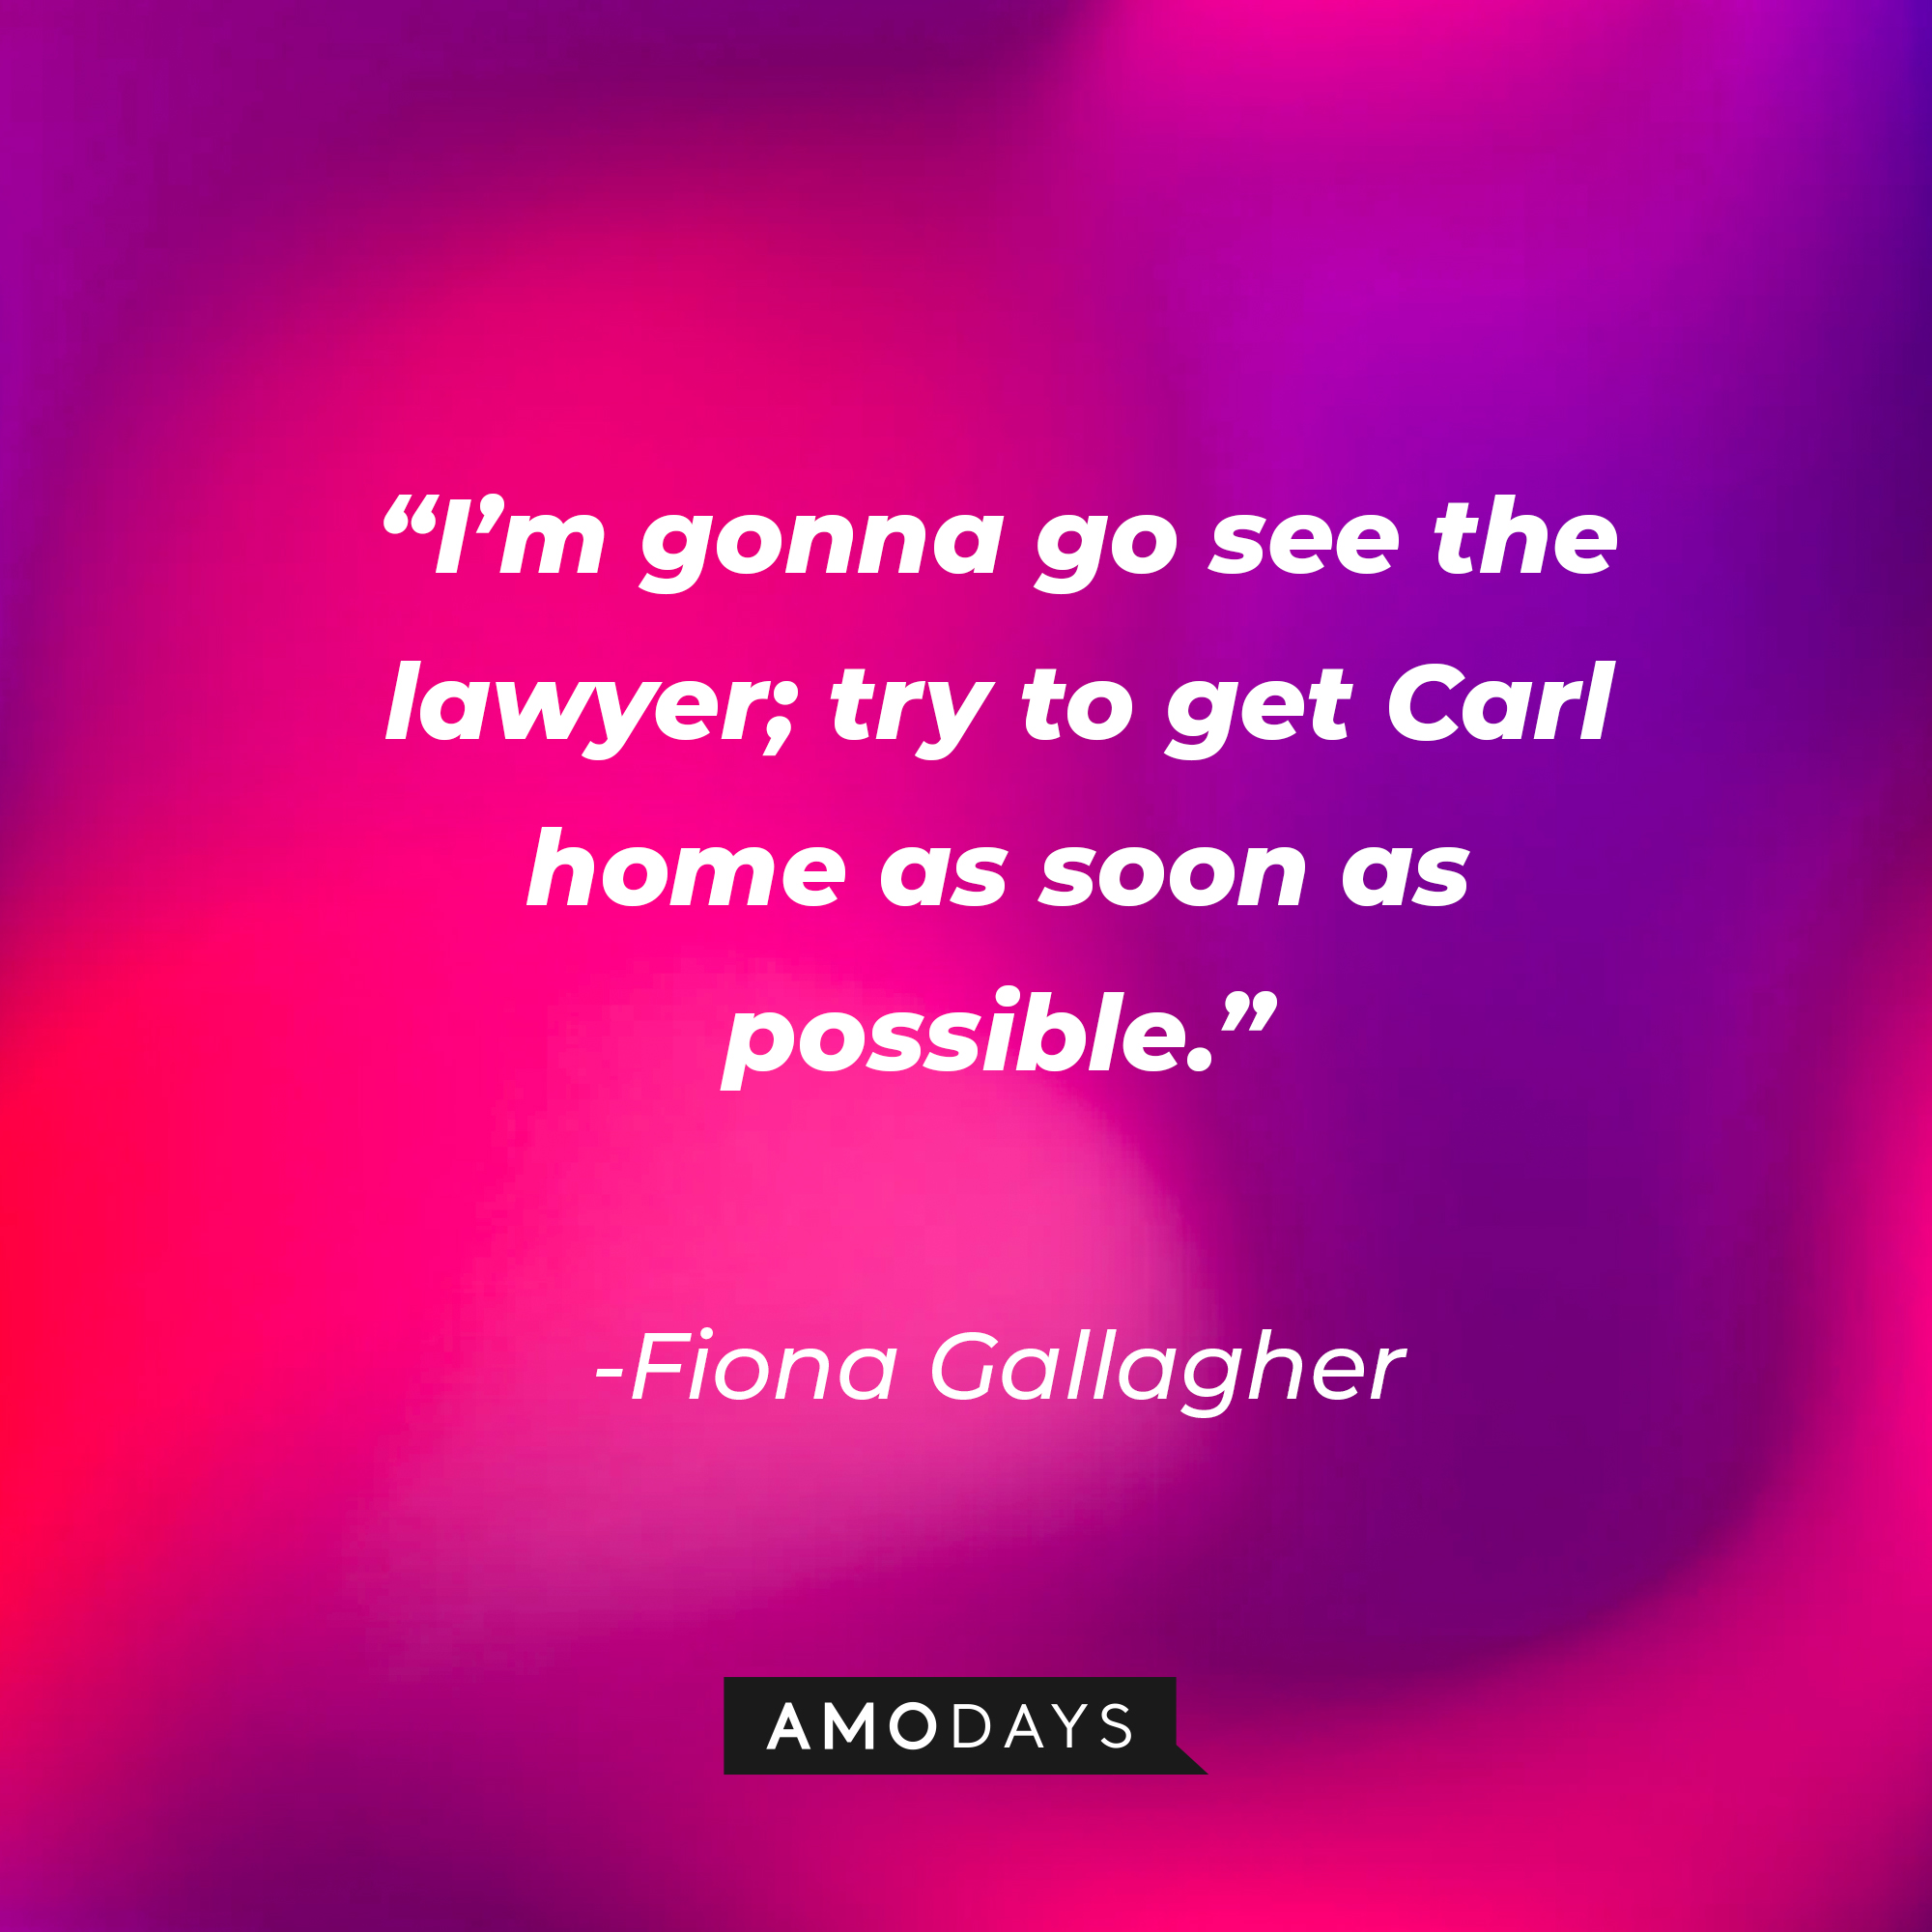 Fiona Gallagher’s quote: “I’m gonna go see the lawyer; try to get Carl home as soon as possible.” | Source: AmoDays